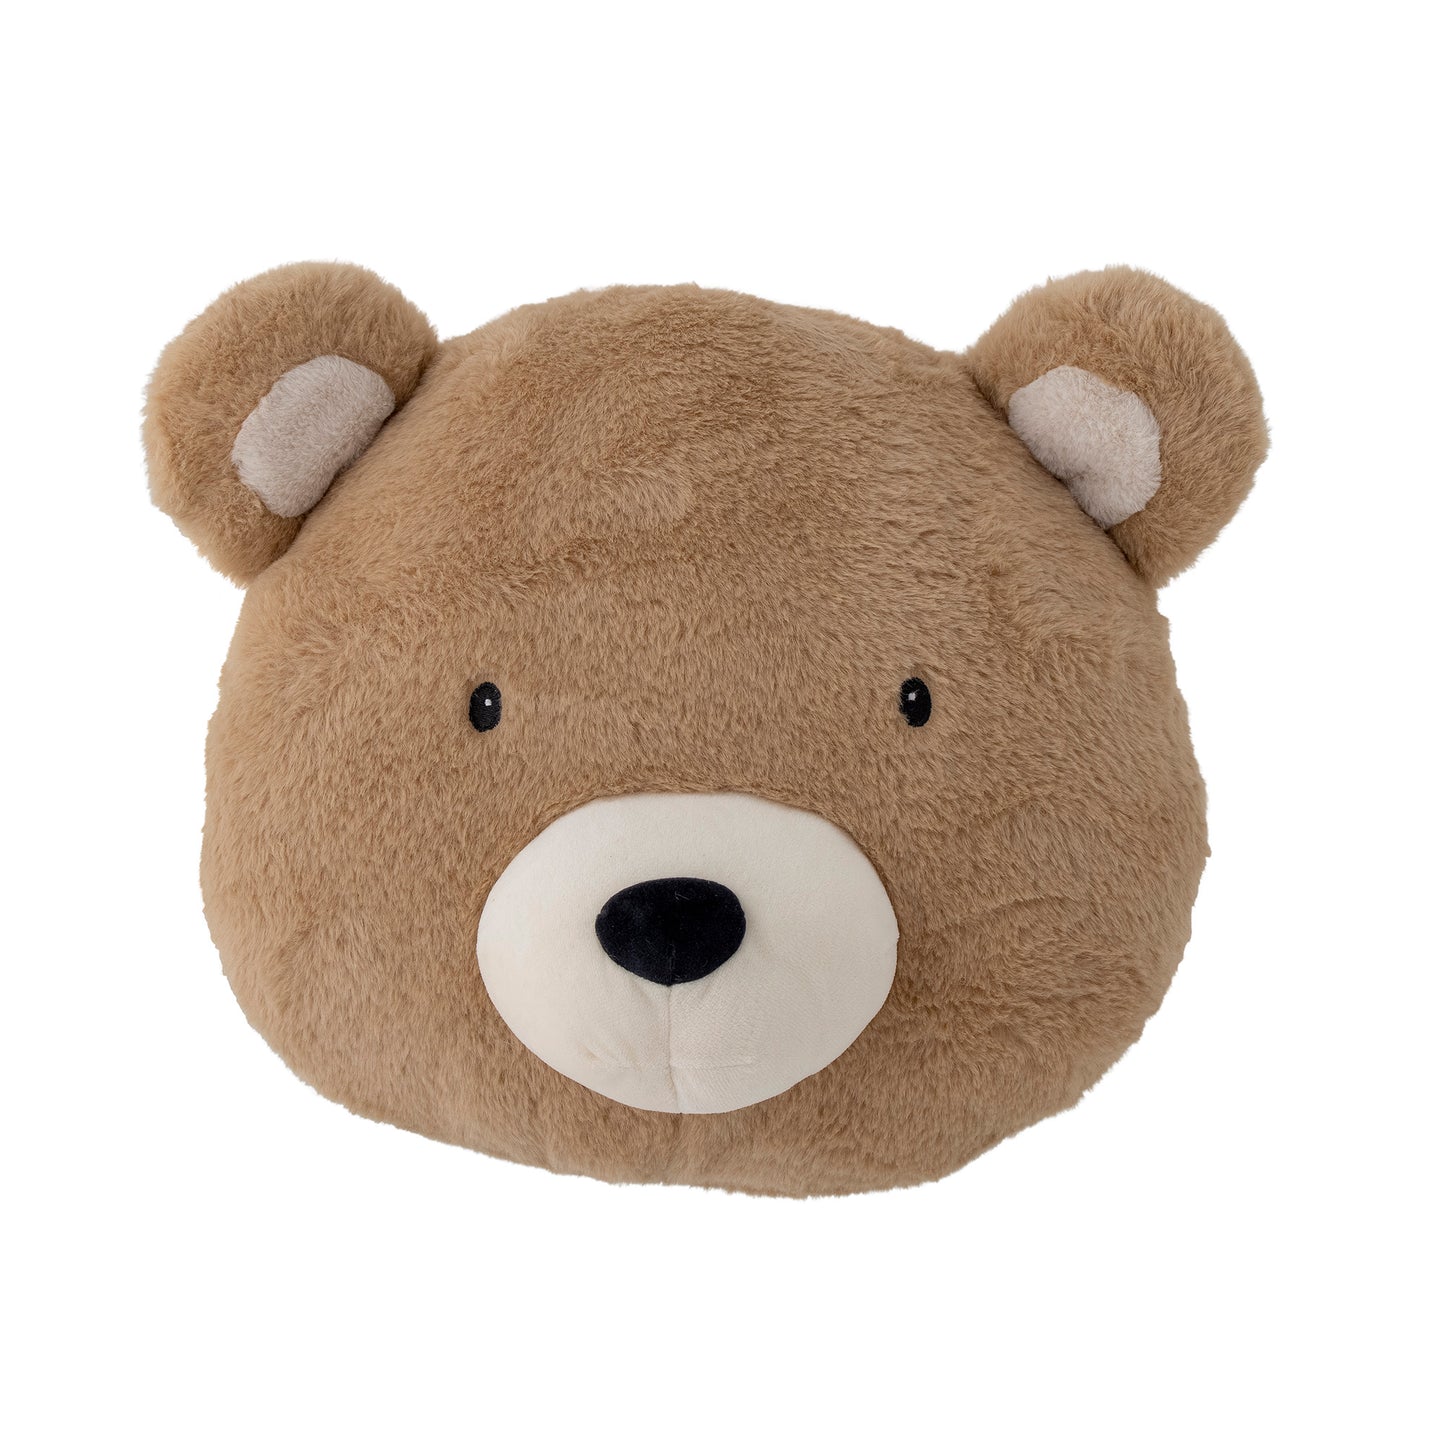 Stuffed Brown Bear Pillow, Harris is the sweetest teddy cushion you'll find. His friendly litte face with the snuggly ears is sure to make him a favourite both for cuddles and for play.  Dimensions: L40,5xH33xW20 cm  100% Polyester, Filling: 100% Polyester  Recommended age: +0 M